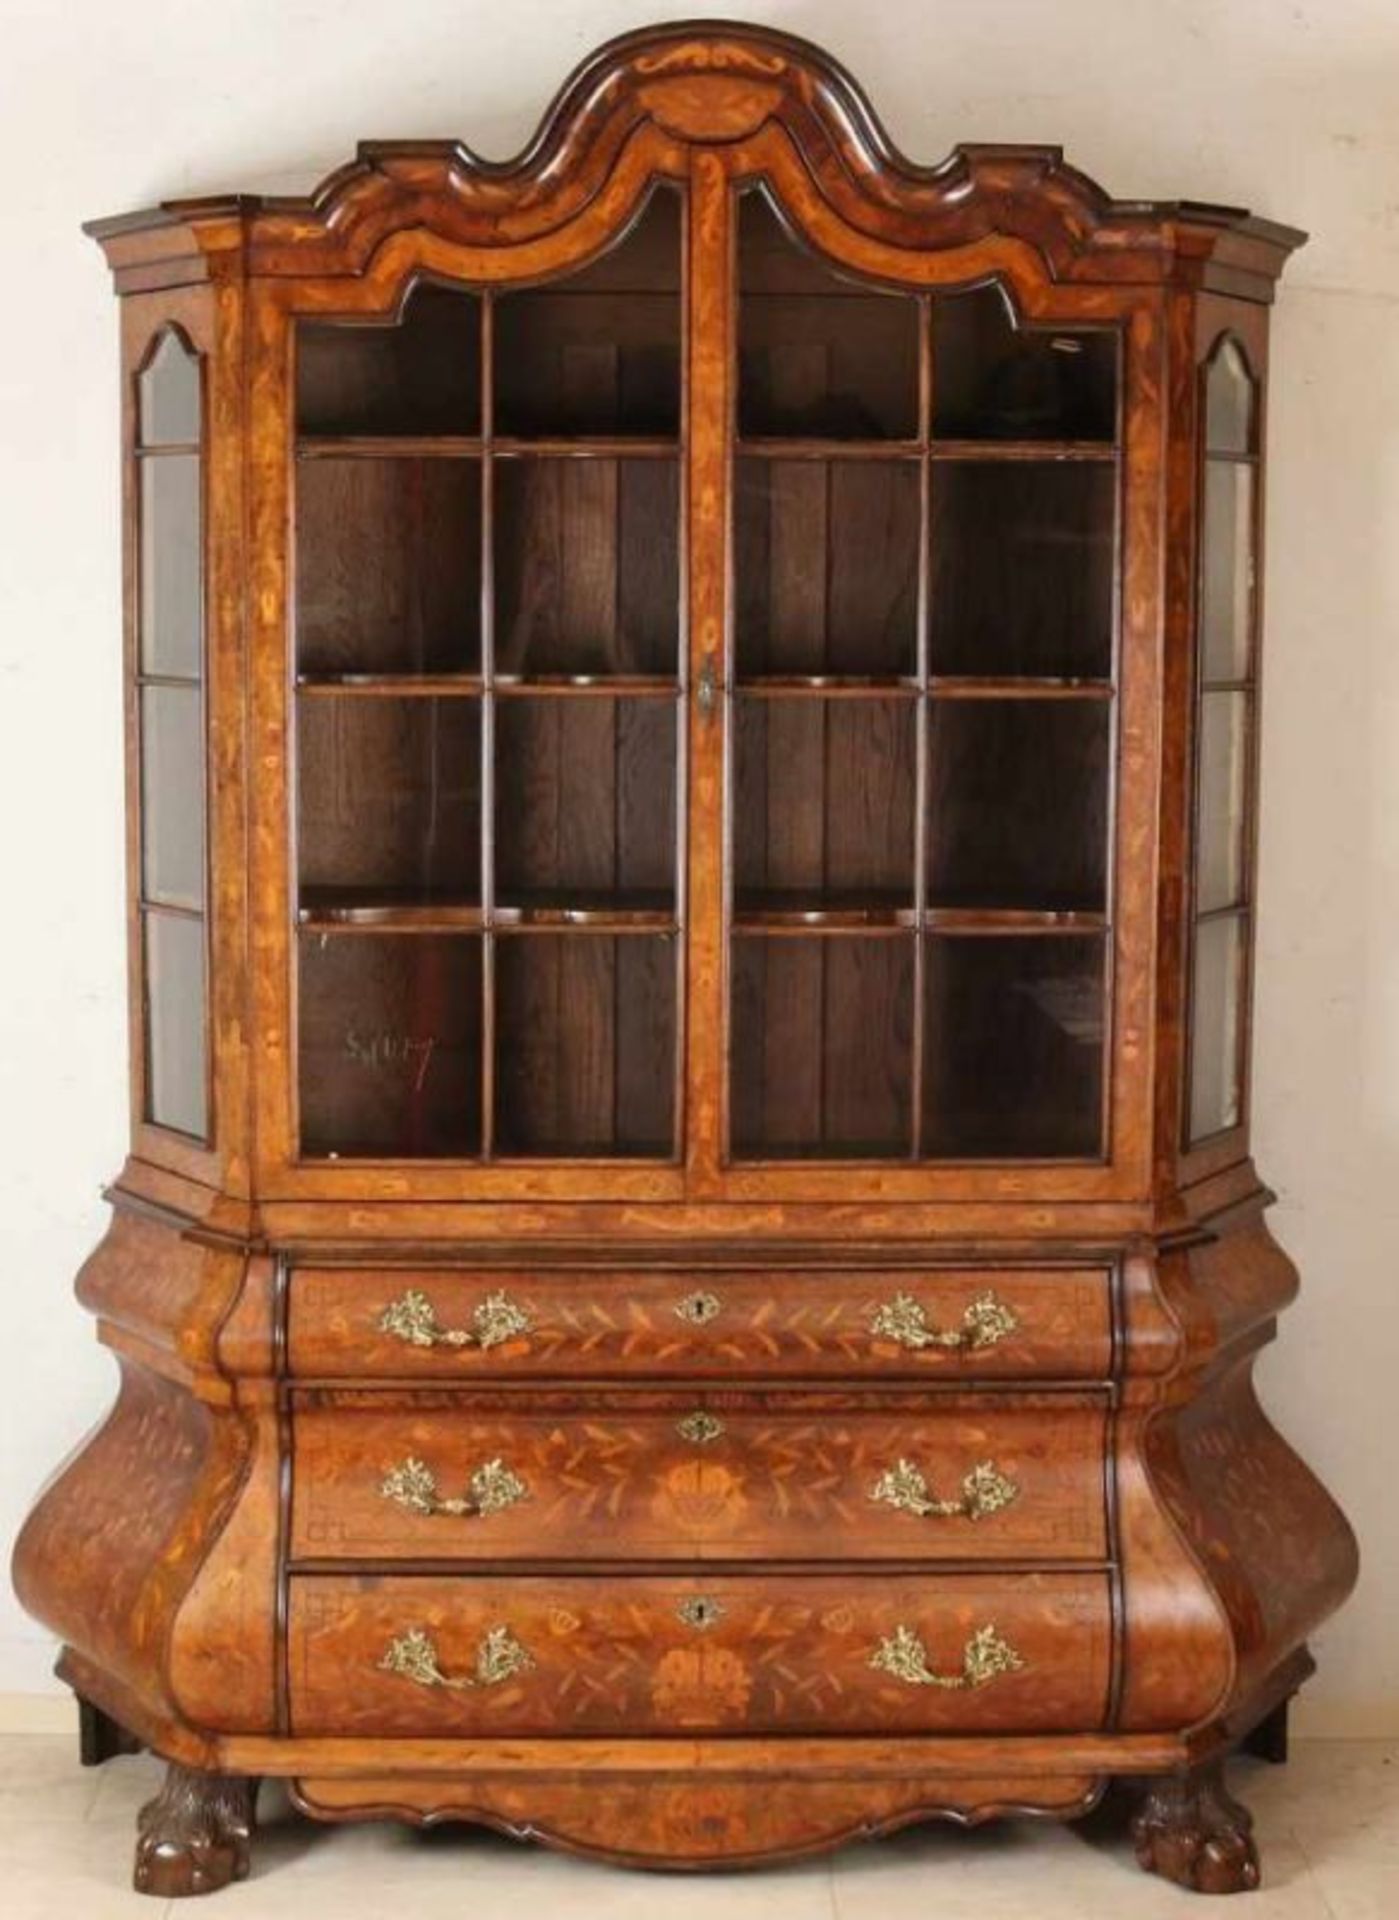 19th Century Baroque walnut cabinet with rich floral marquetry, bronze fittings and claw feet.